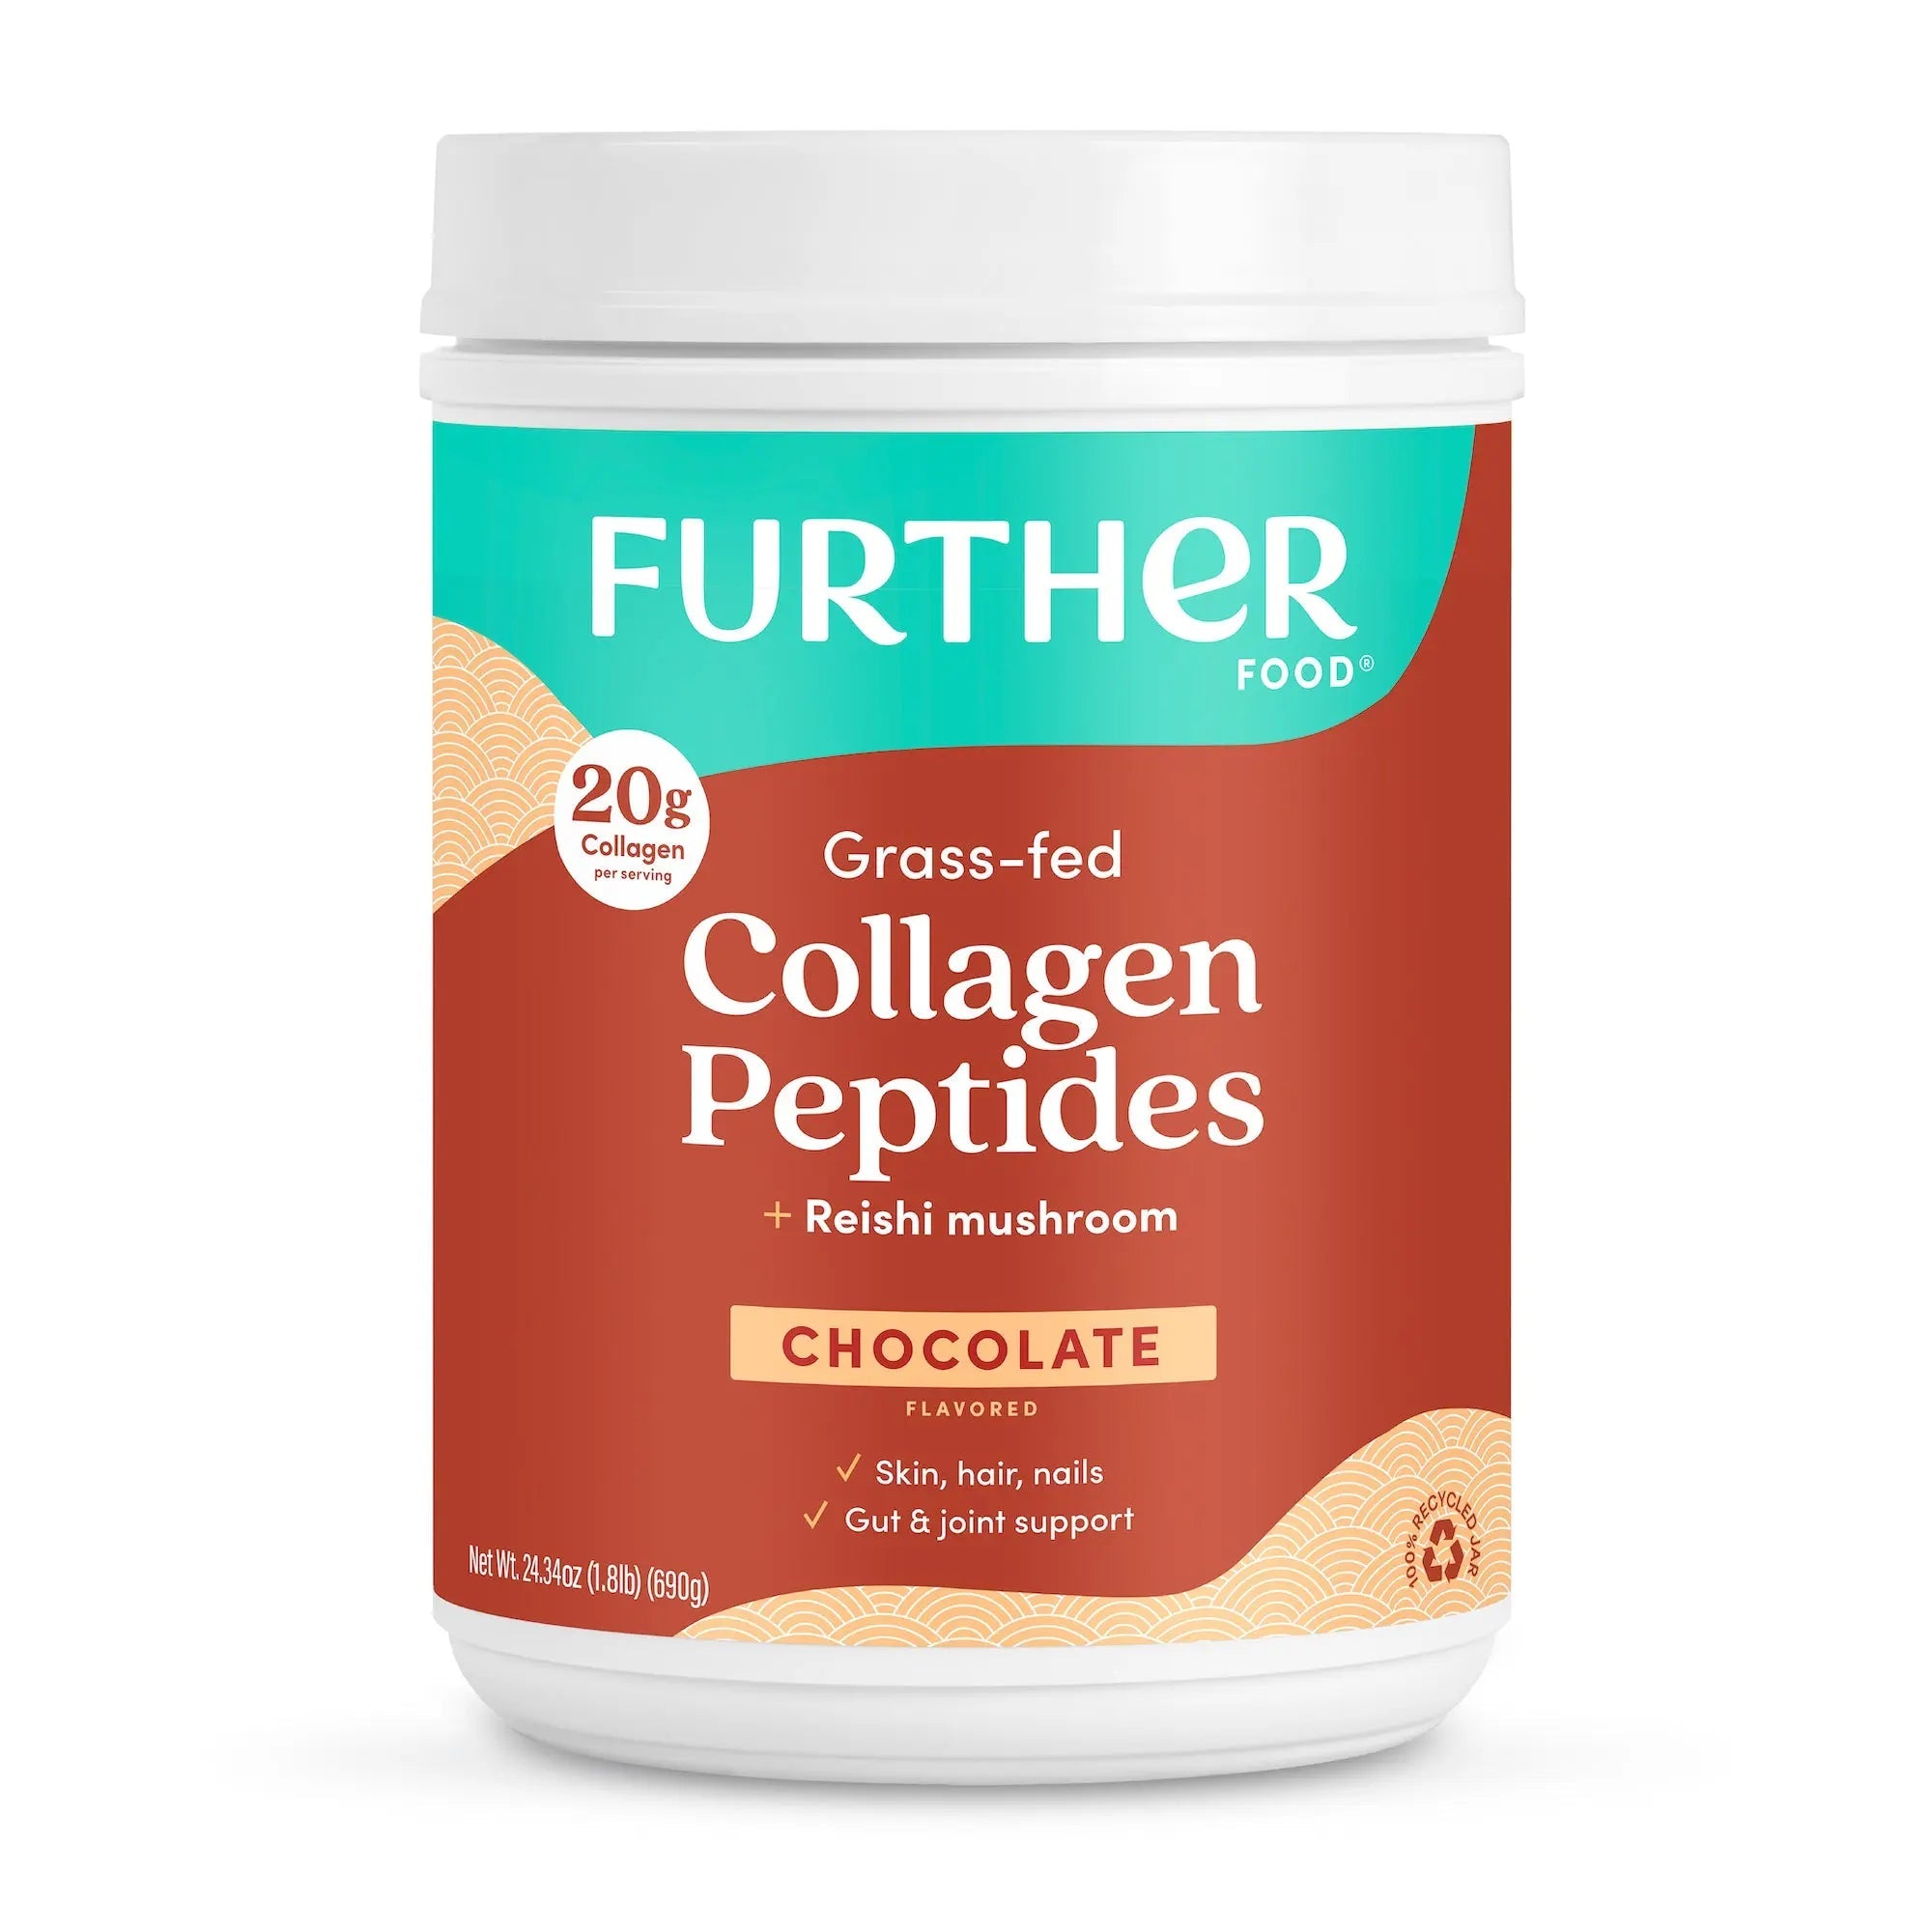 Chocolate Collagen Peptides Powder - Further Food -  24-oz.-30-SERVINGS